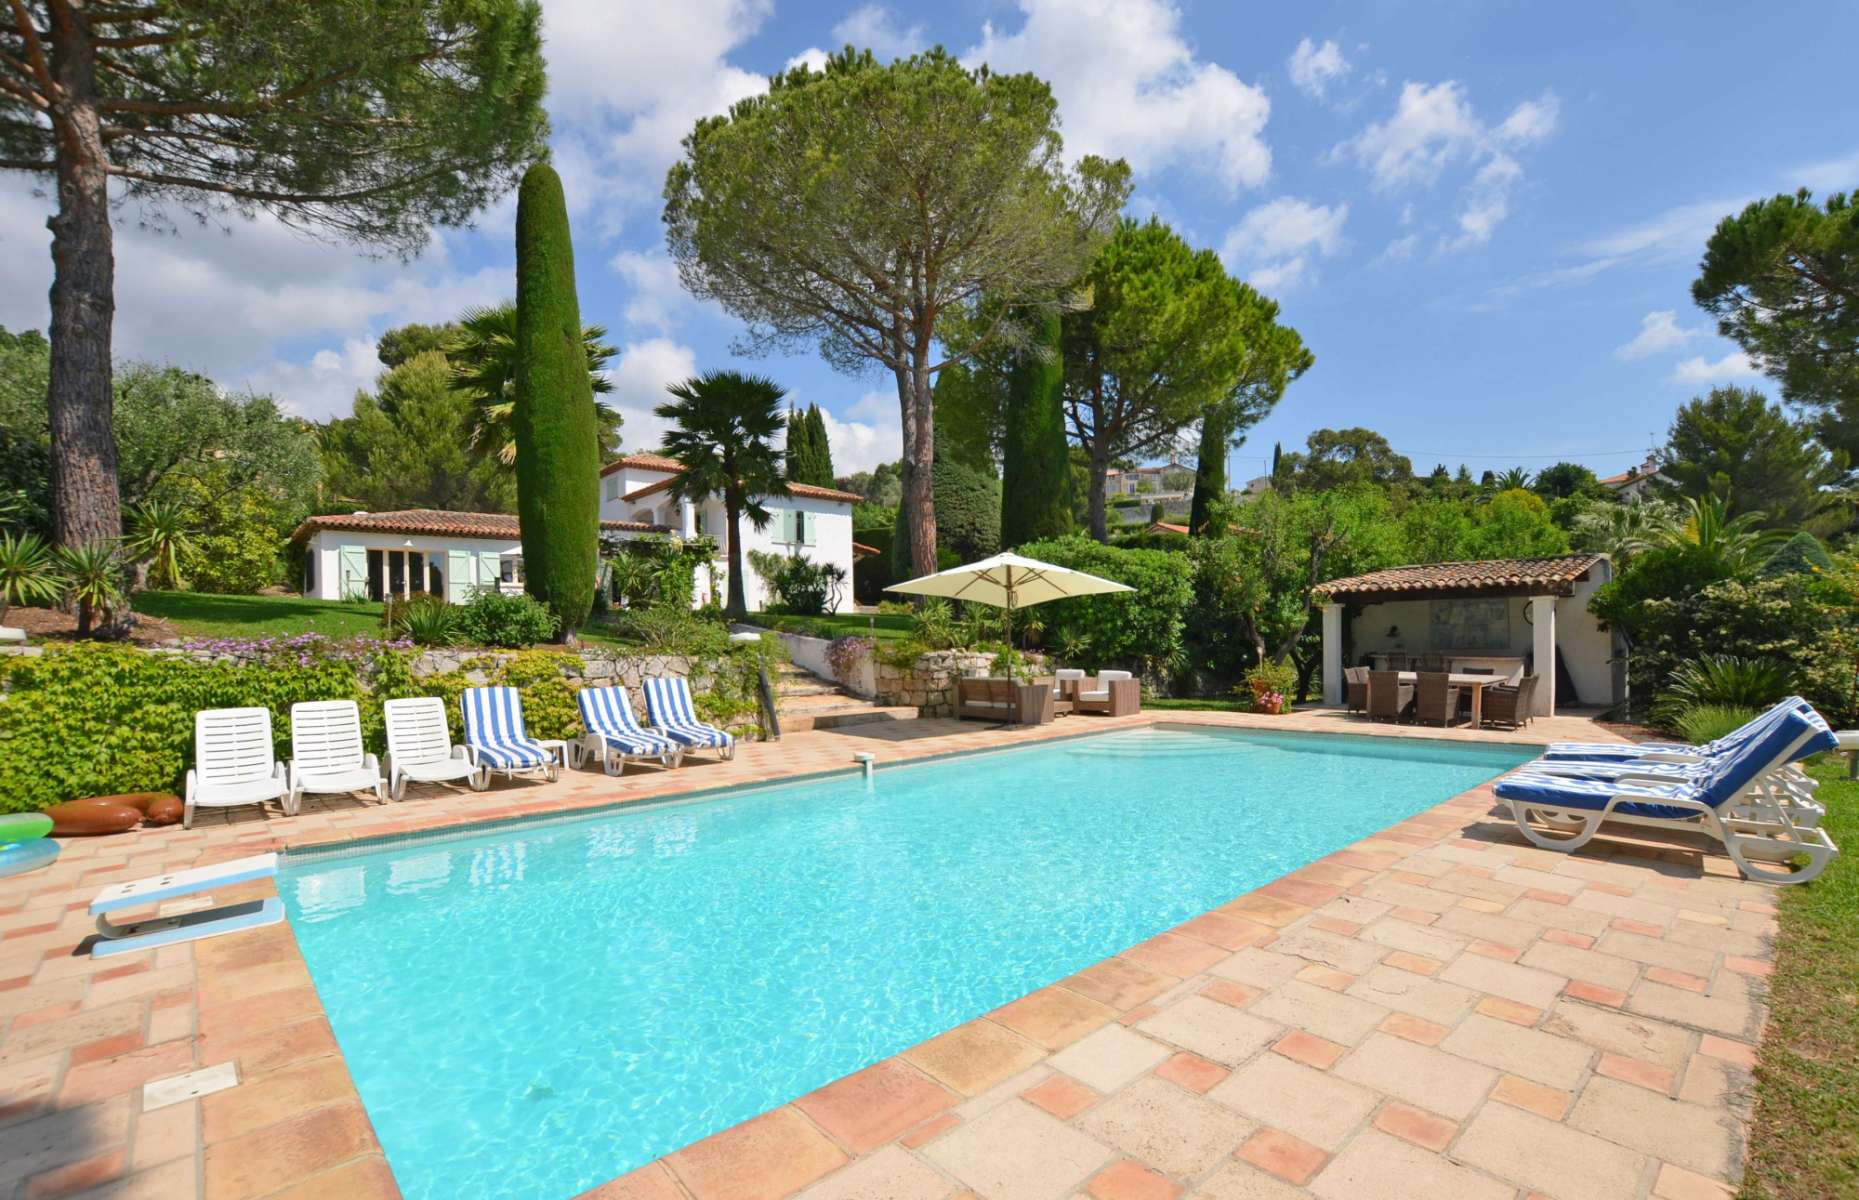 Villa for rent in Mougins with a big park